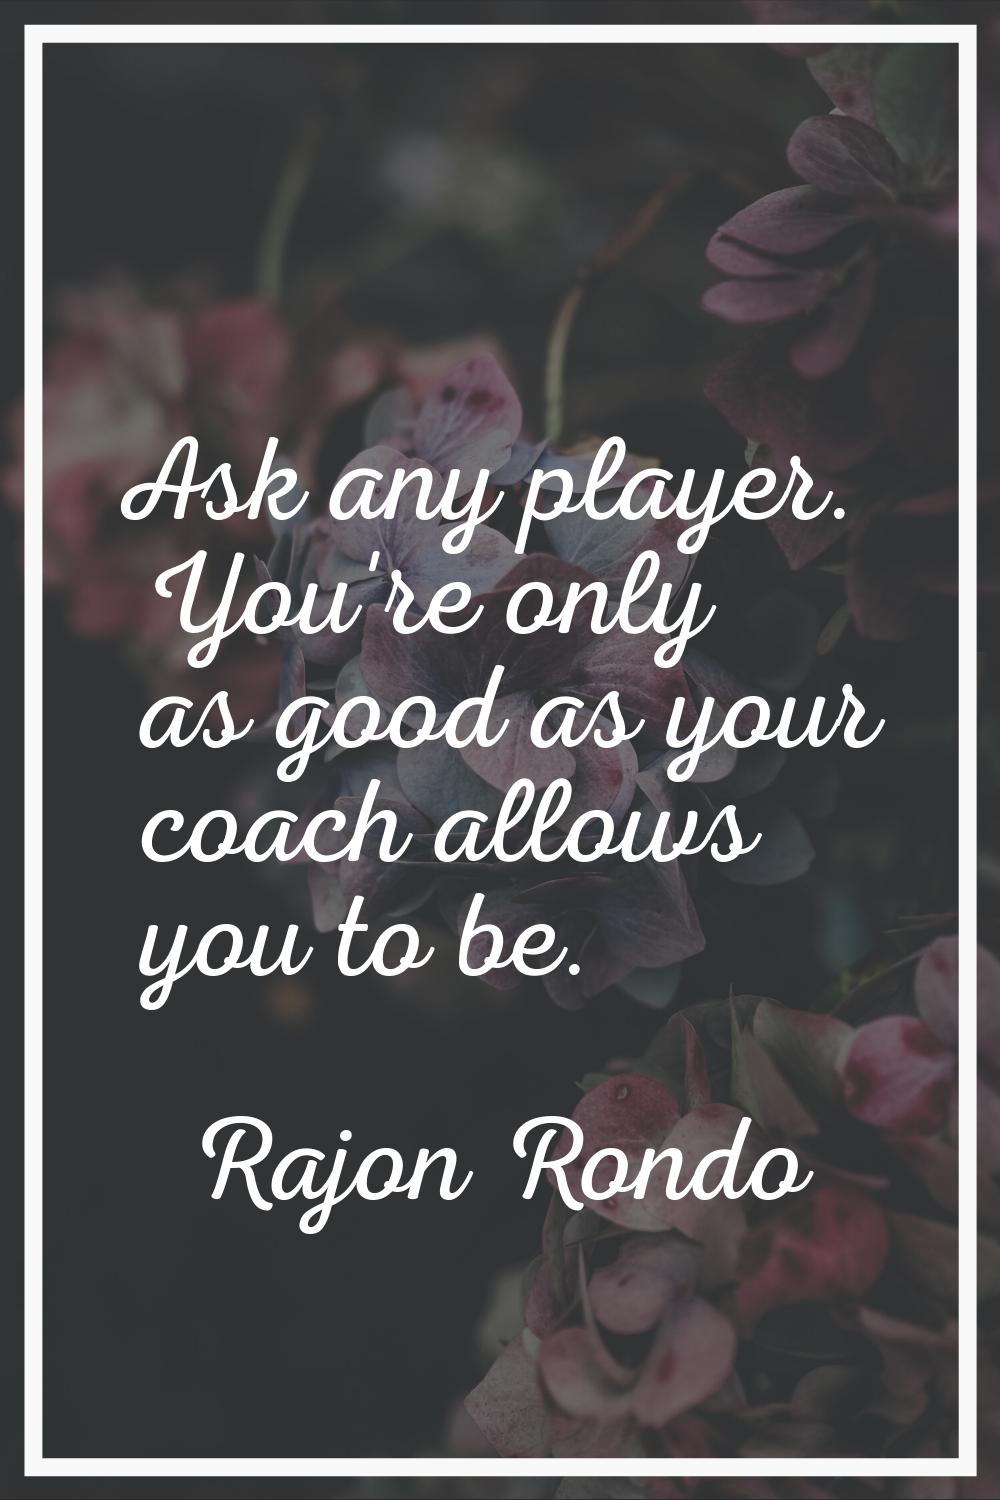 Ask any player. You're only as good as your coach allows you to be.